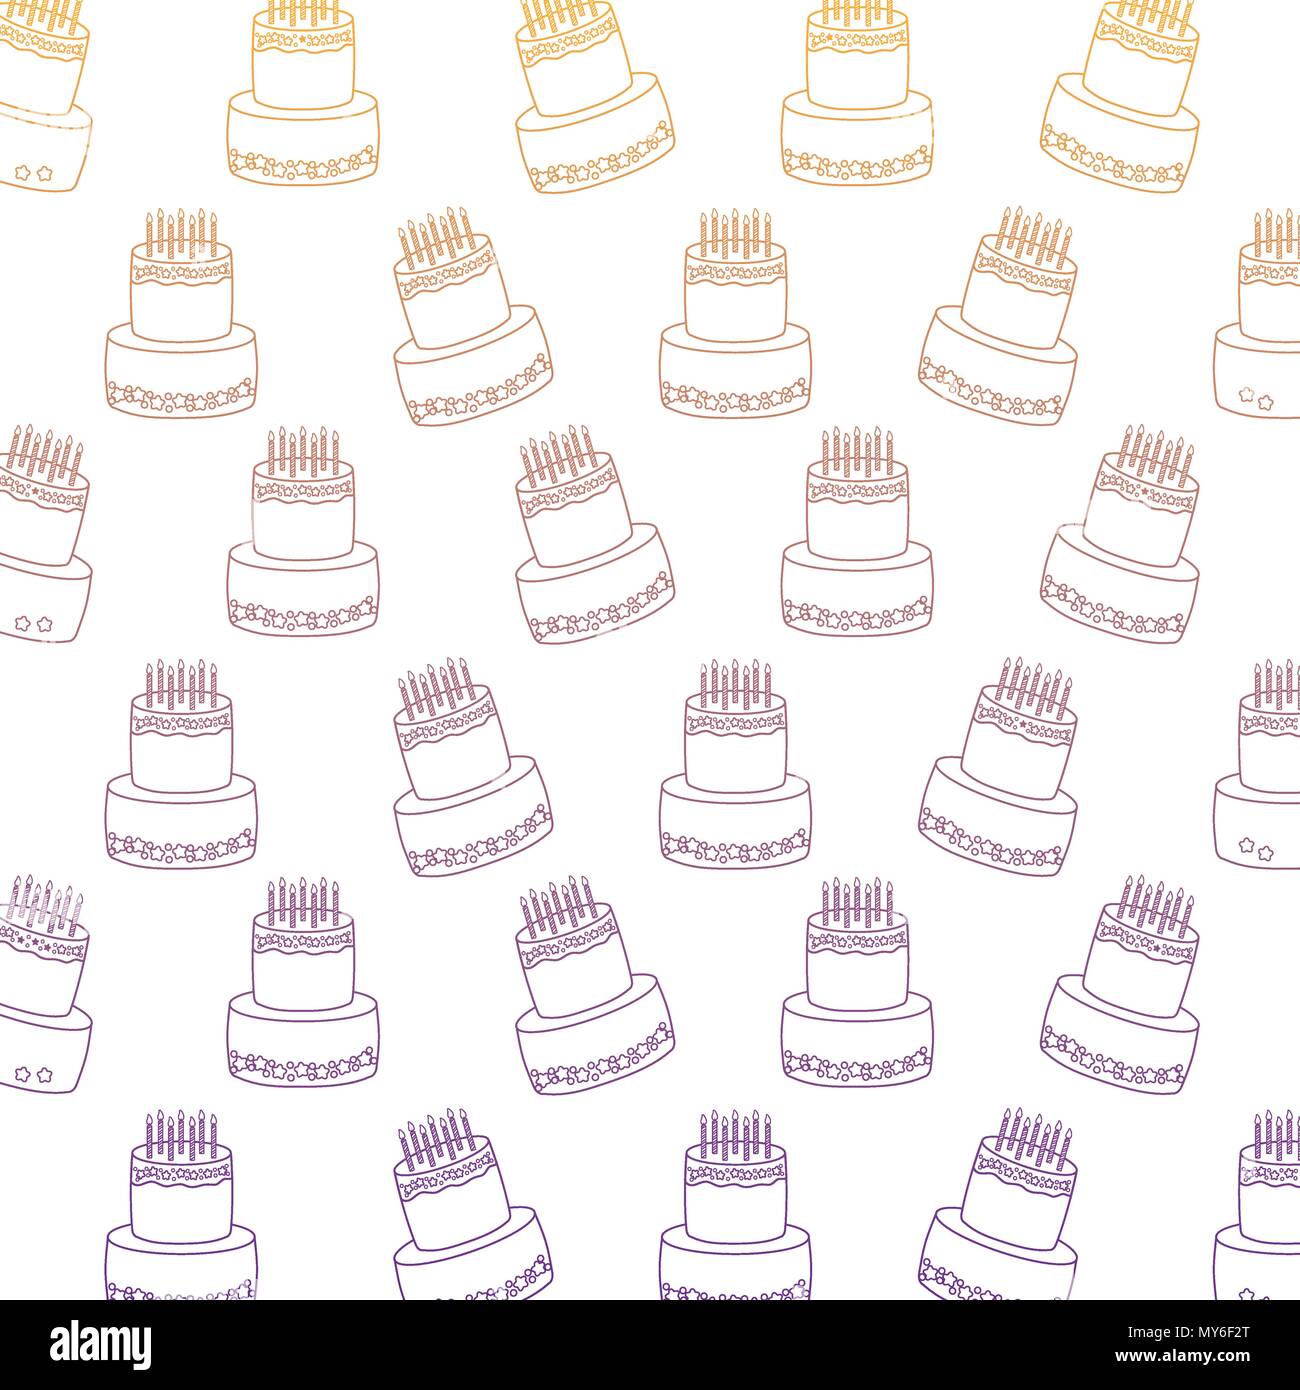 Hand Drawn Seamless Cup Cake Pattern Vector for Free Download | FreeImages